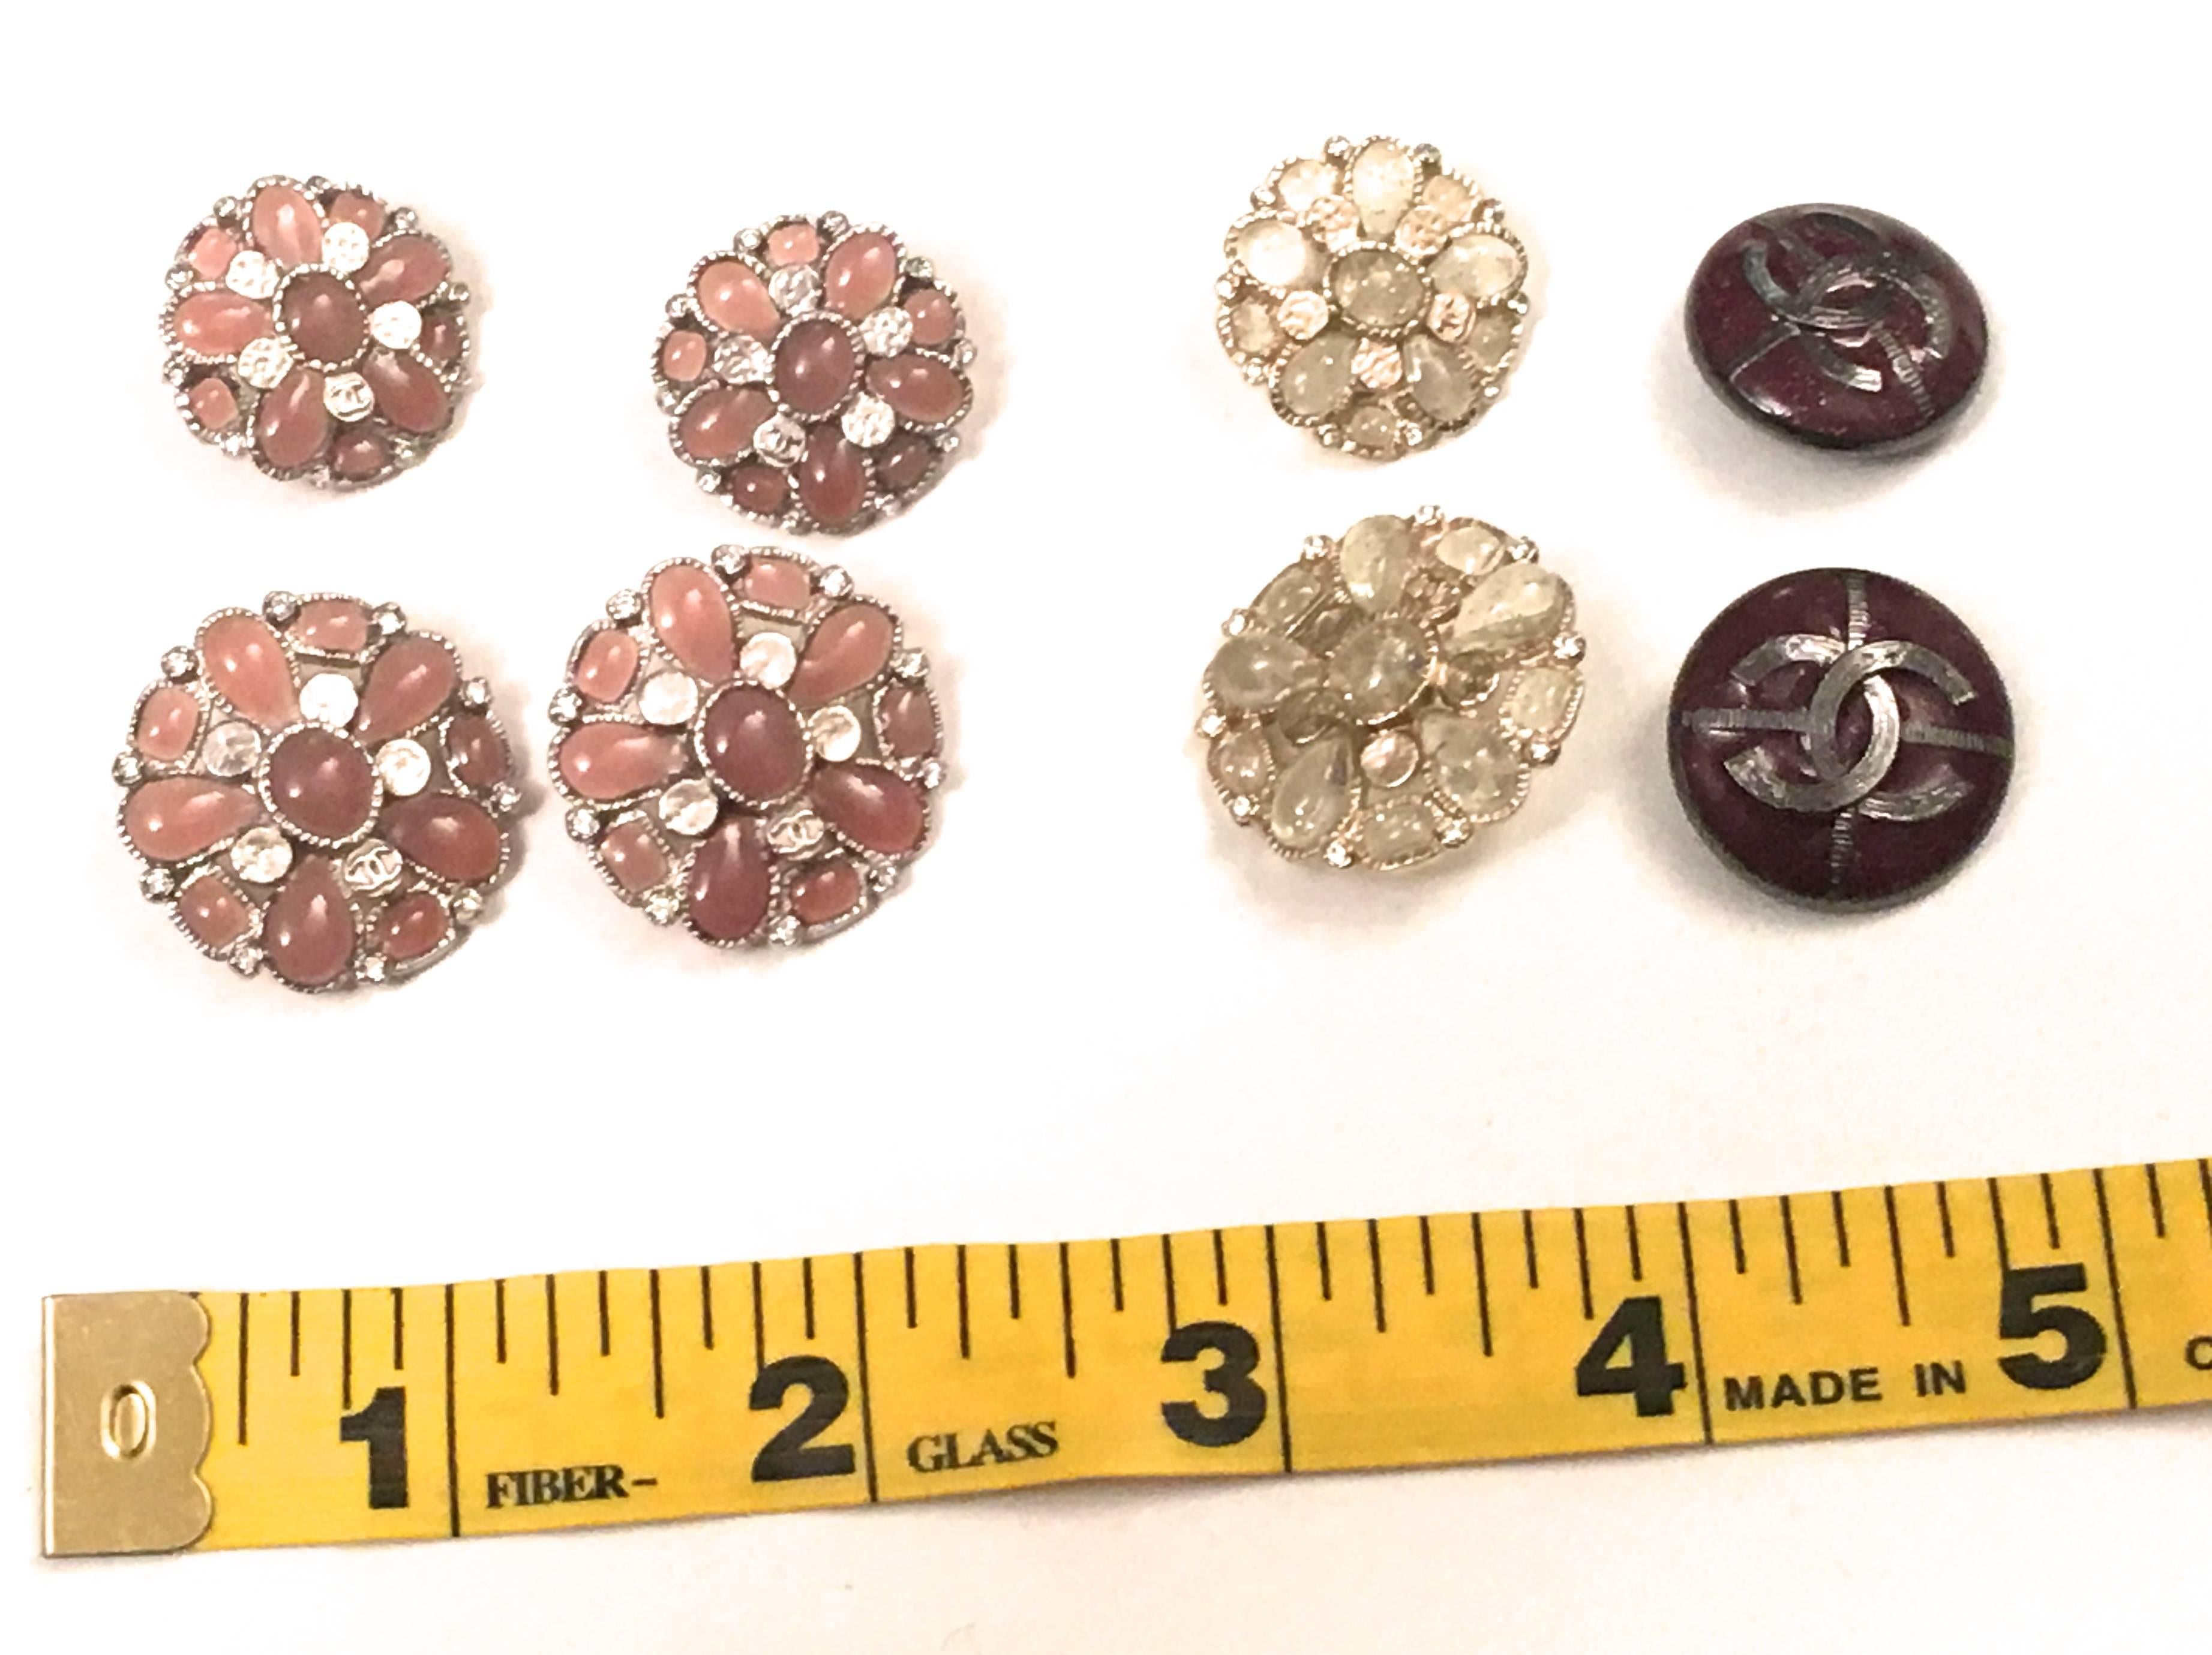 Presented here is a set of 8 assorted buttons from Chanel Paris. The buttons are as follows: 

Four matching buttons that are a composition of a silver tone metal button frame with a pink gripouix throughout and small circles with the cc mark. Two